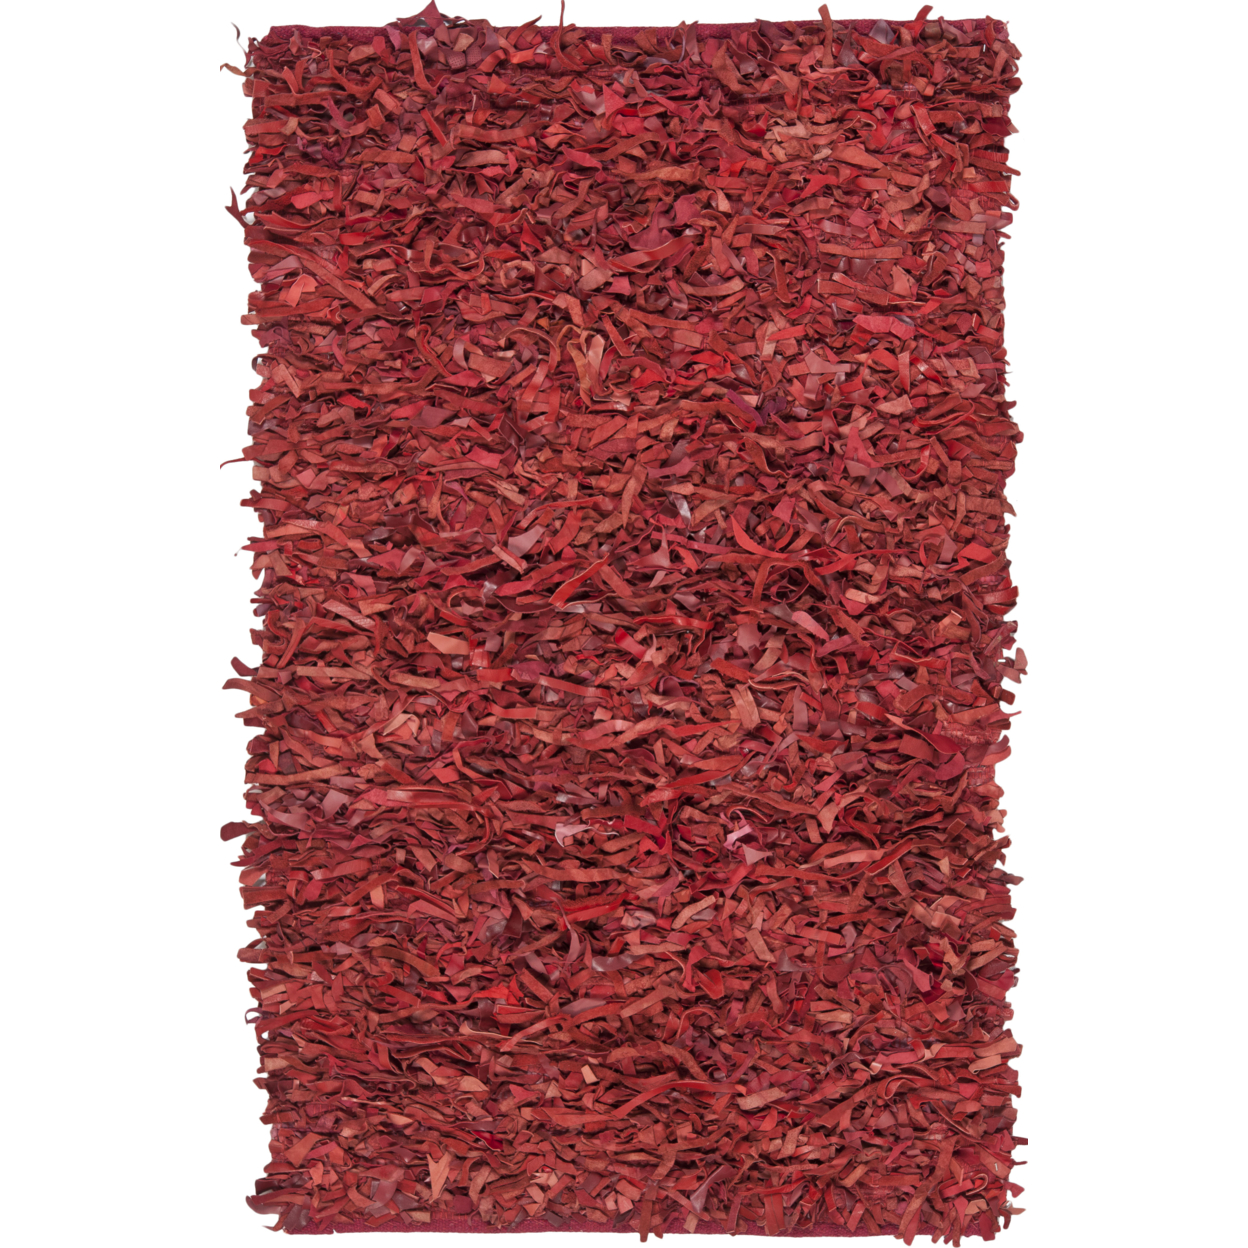 SAFAVIEH Leather Shag LSG511D Hand-knotted Red Rug - 8' Square